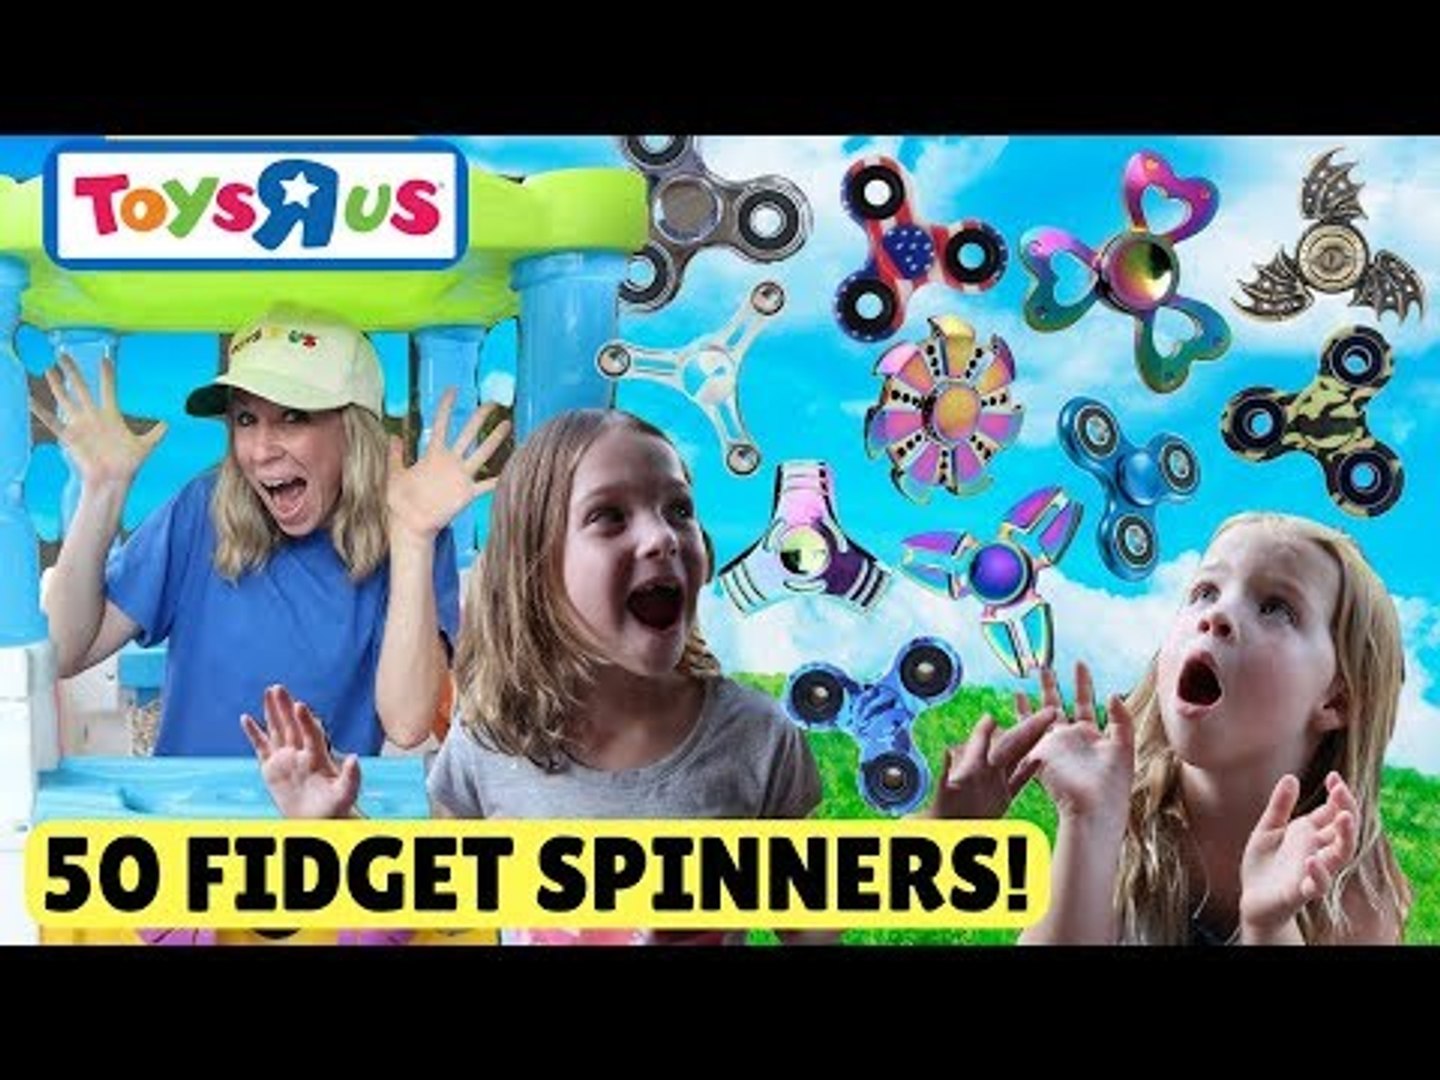 Fake Toys R Us Worker Sells 50 Fidget Spinners to Addy and Maya! - video  Dailymotion